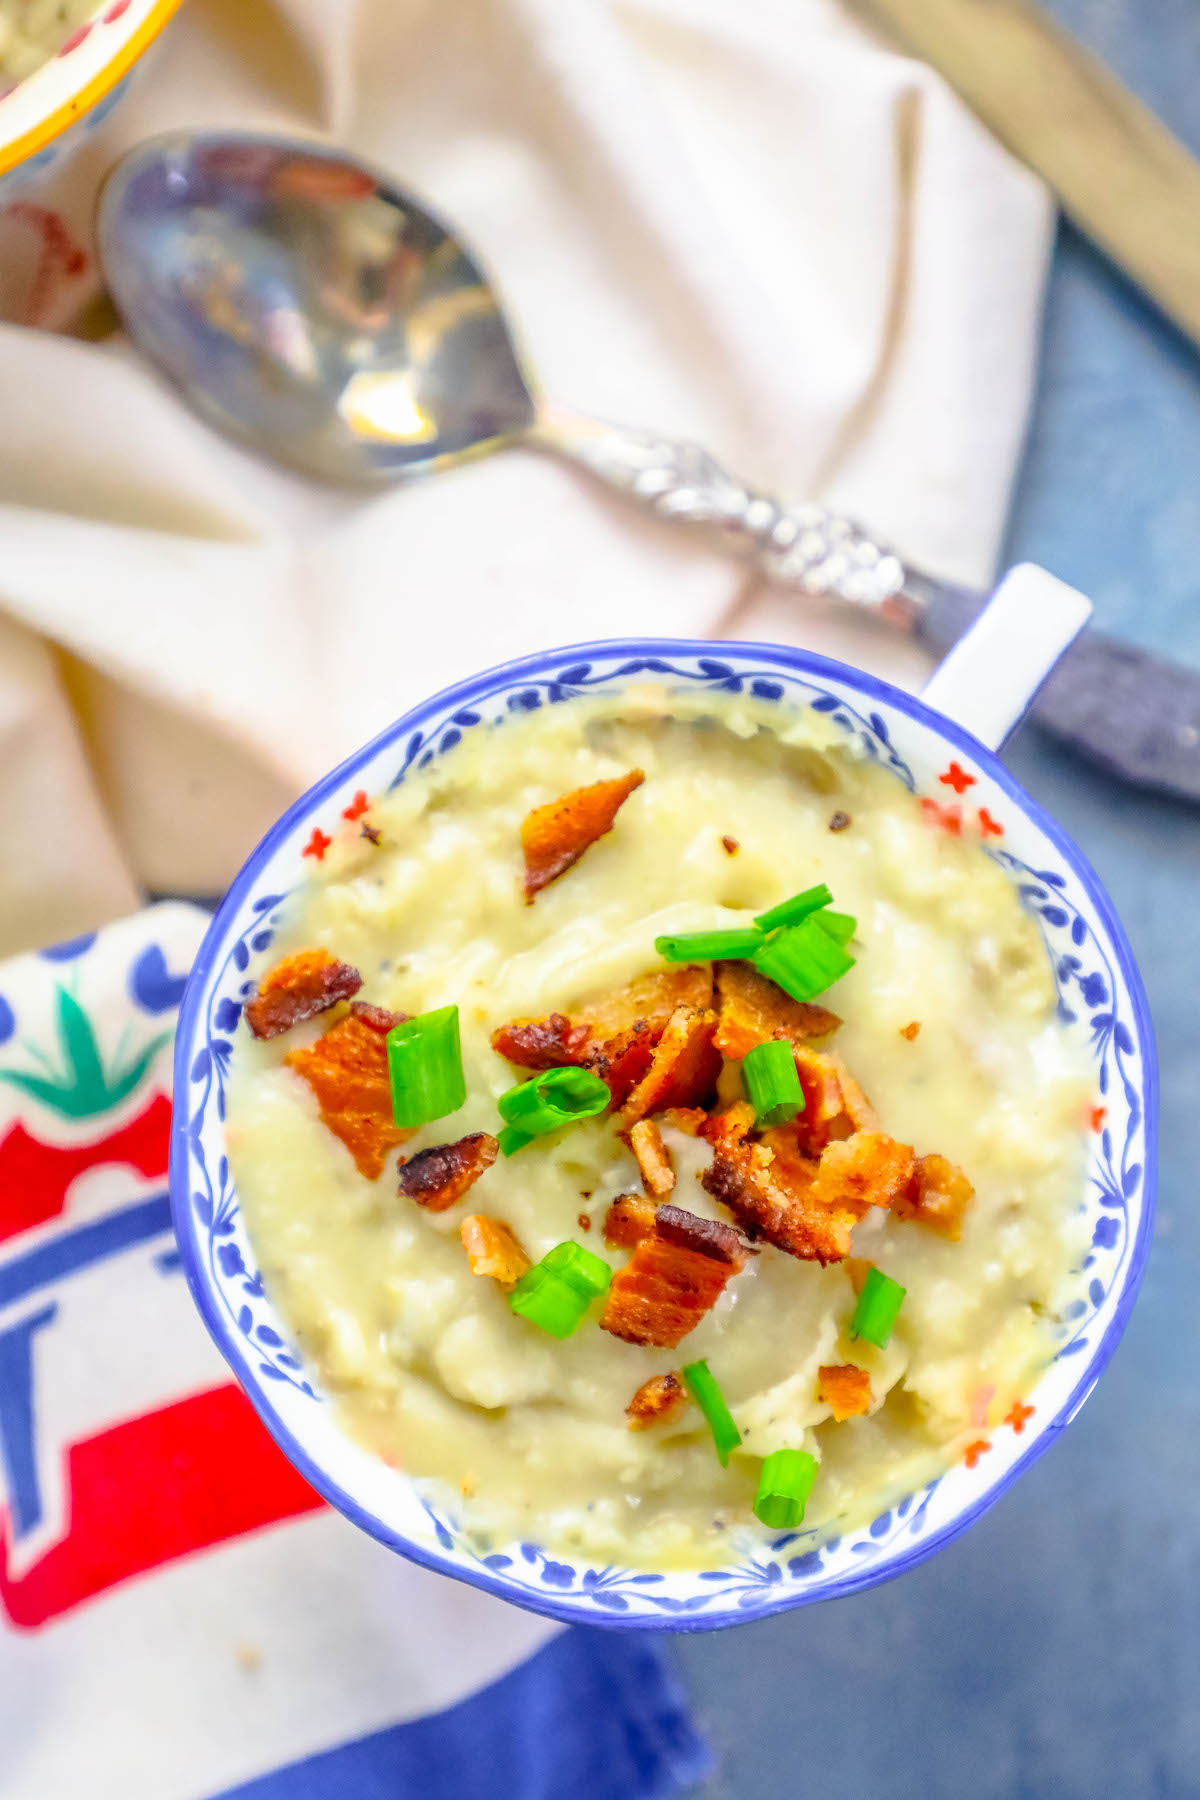 https://sweetcsdesigns.com/wp-content/uploads/2013/11/loaded-mashed-potato-soup-recipe-thanksgiving-leftover-ideas-picture.jpg